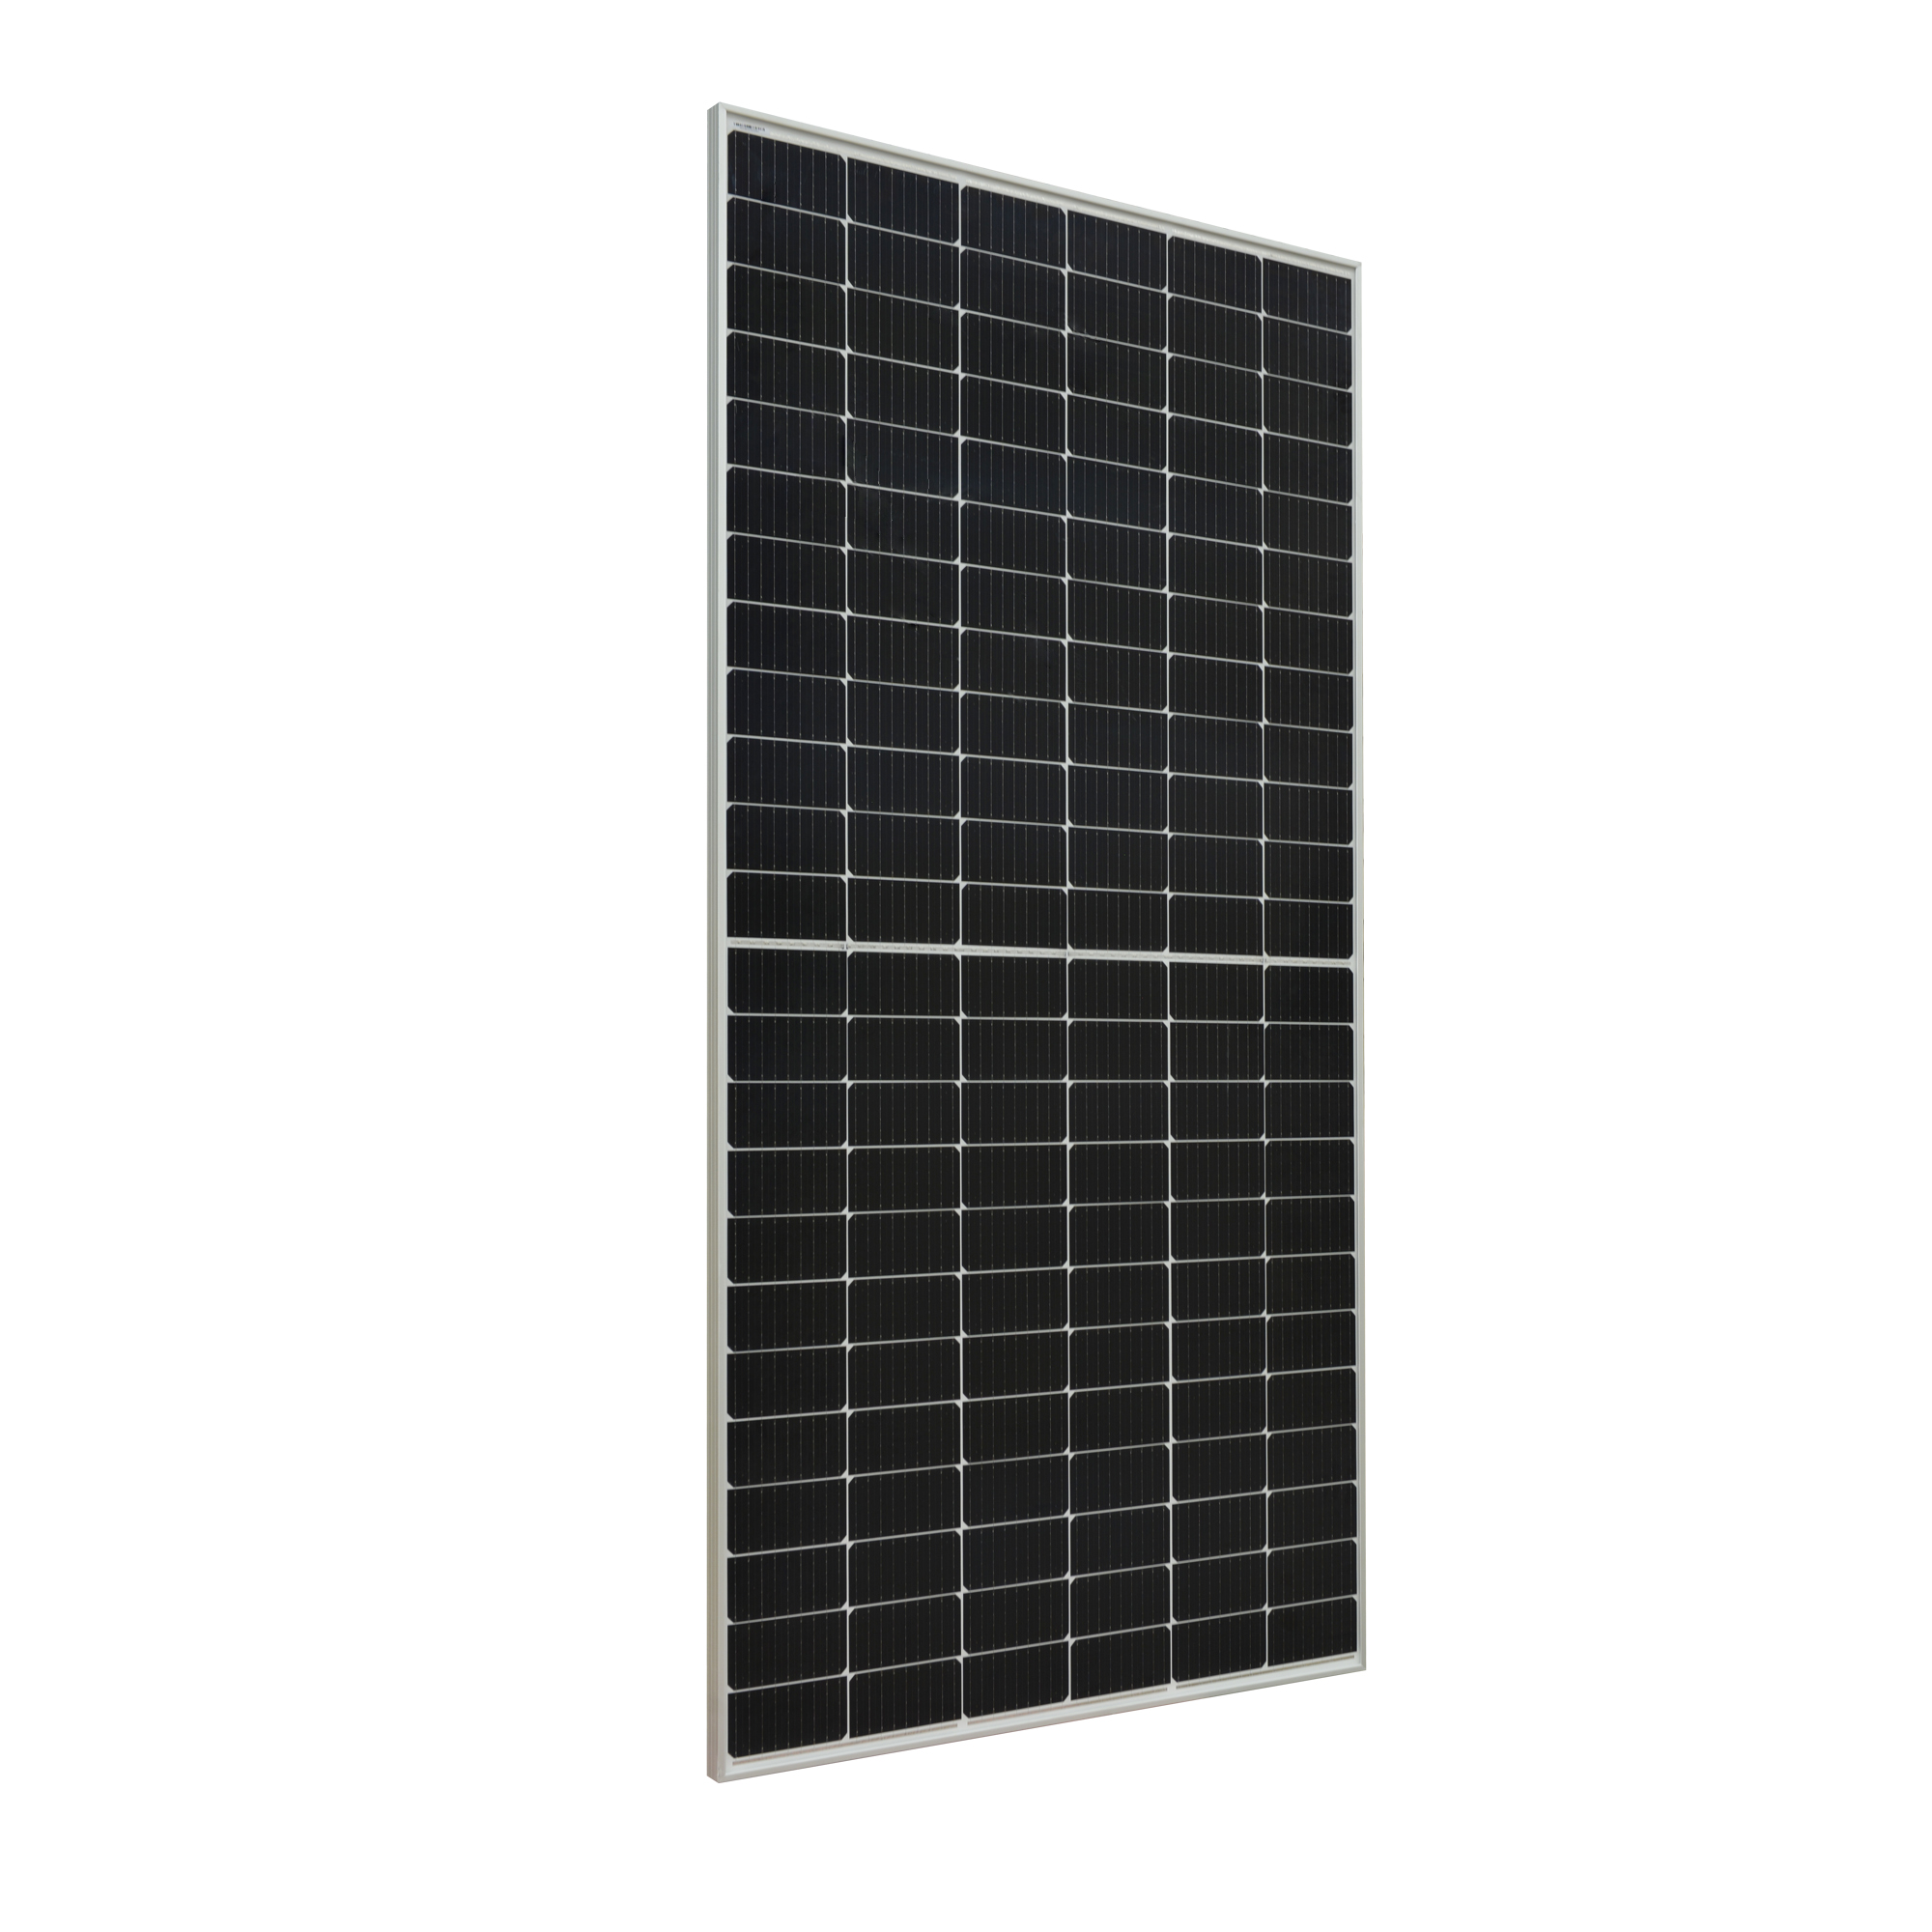 300W Monocrystalline Off-grid Solar System Panel For House Photovoltaic Solar Power Panel